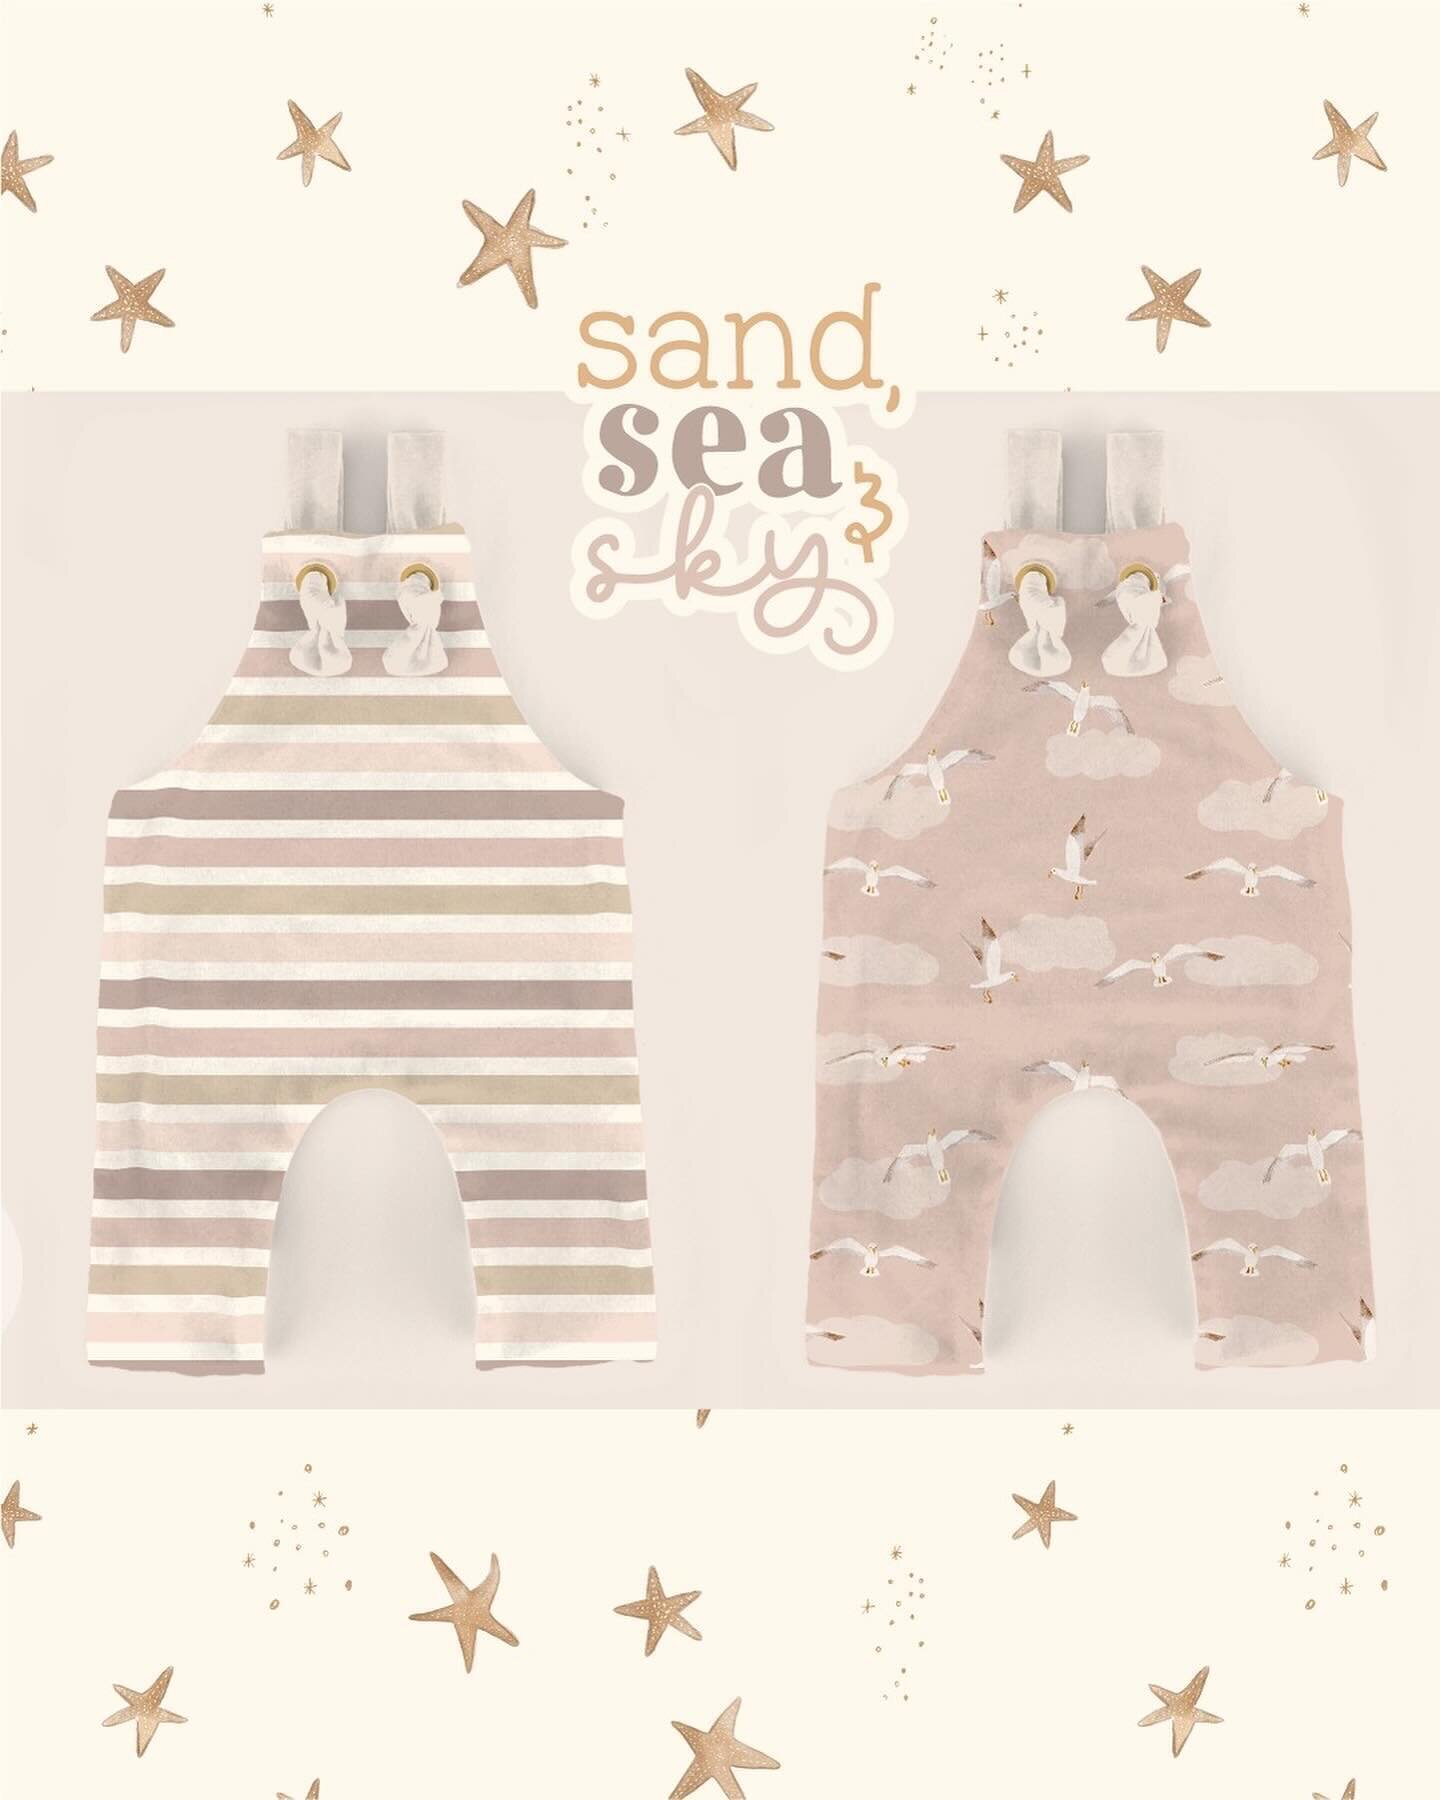 &lsquo;Sand, sea &amp; sky&rsquo; will be available on Monday! I first started dreaming up this collection&rsquo;s seafoam color ways but there is also a pink/mauve color way coming too! The pink reminds me of sand and dusky sunset skies. 
⠀⠀⠀⠀⠀⠀⠀⠀⠀
